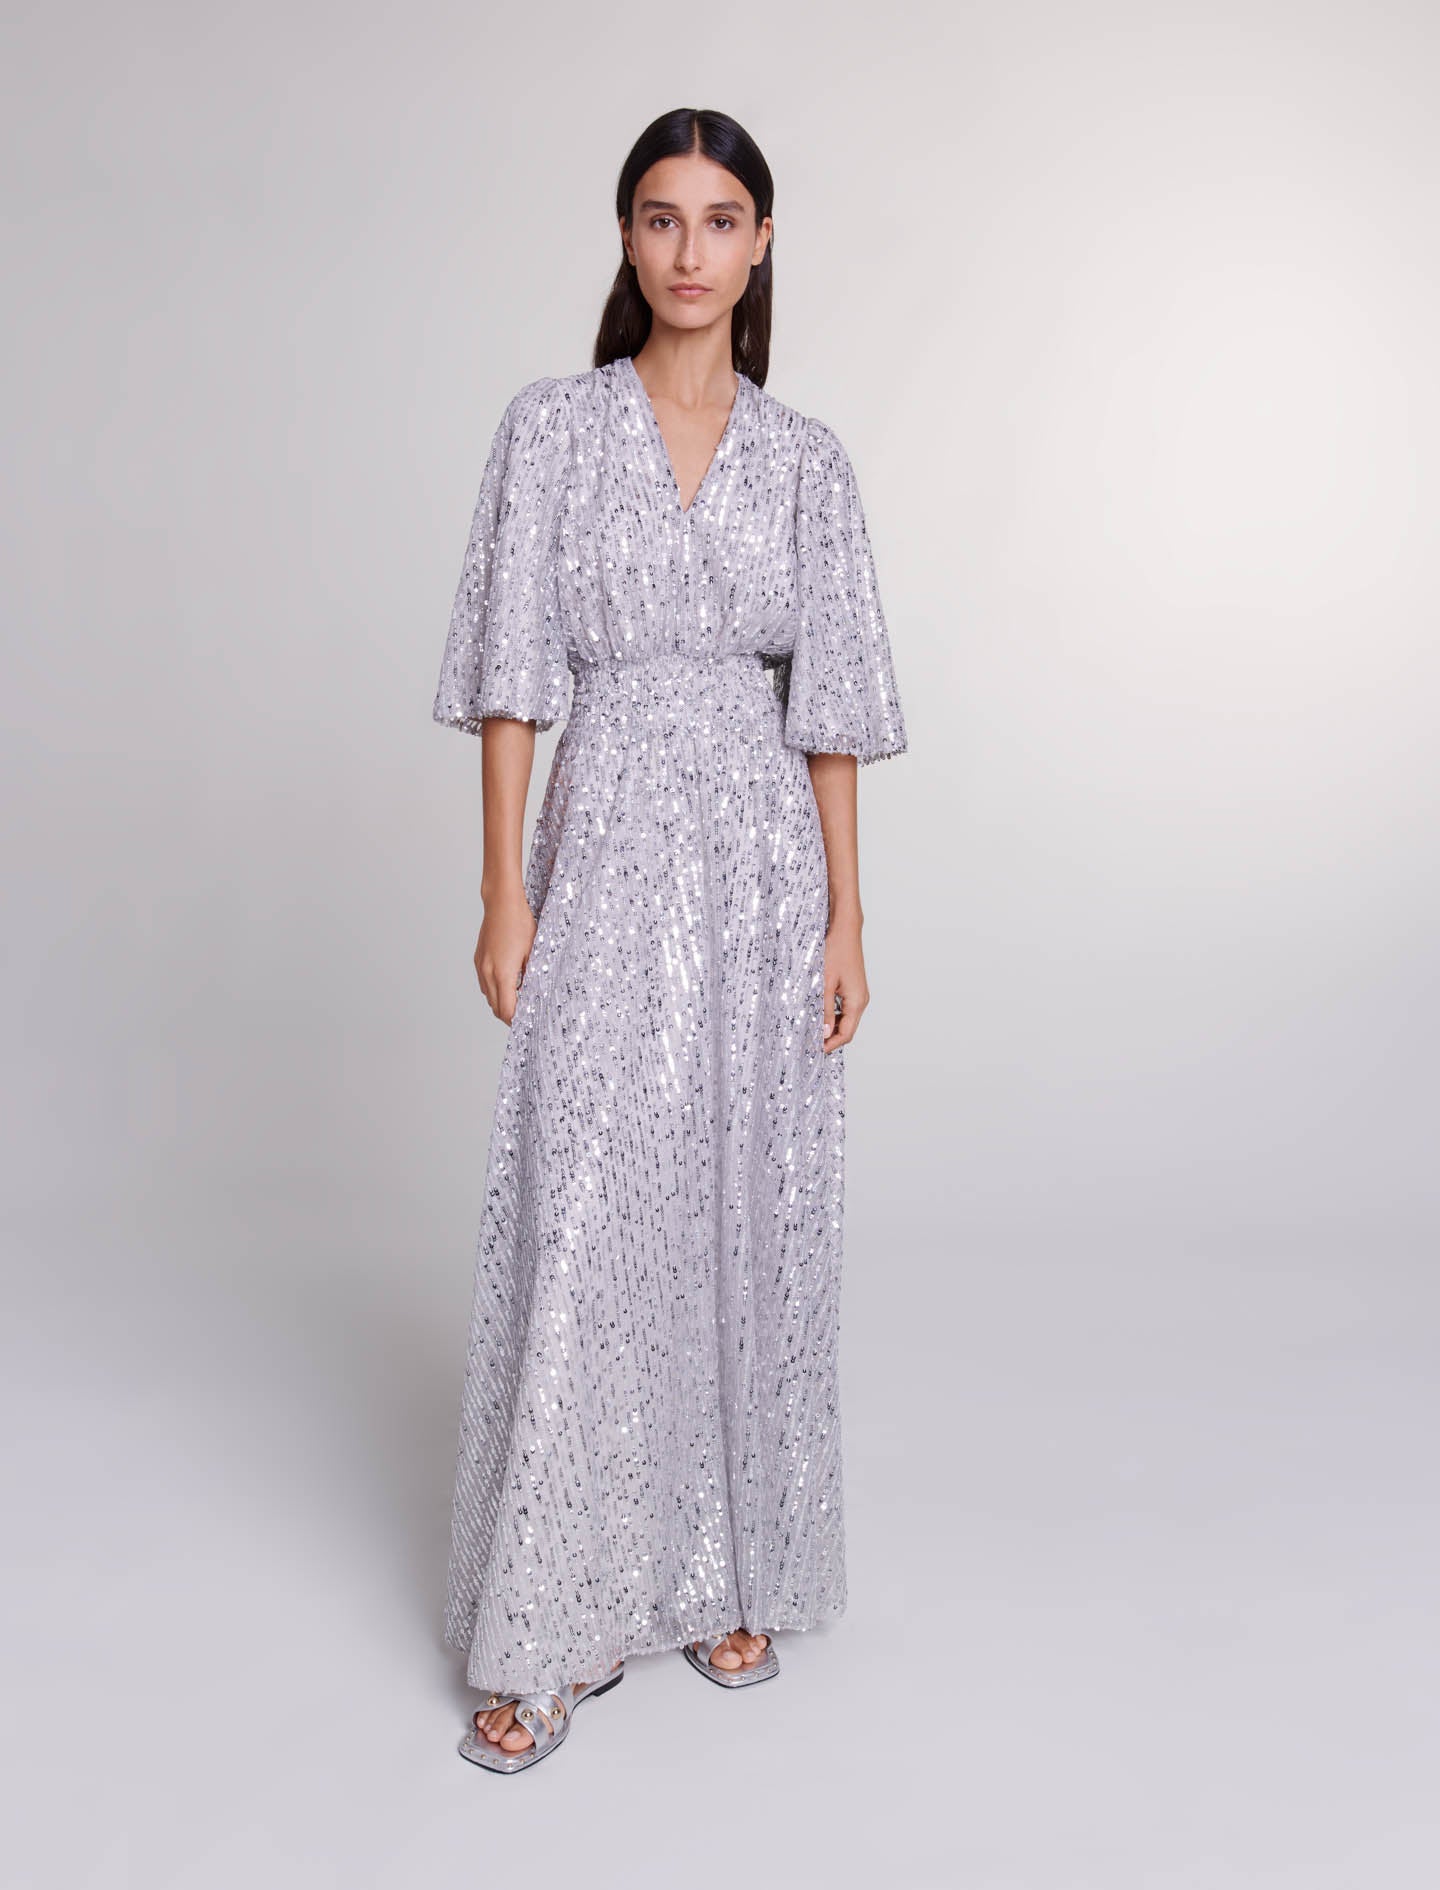 Silver featured  Sequin maxi dress